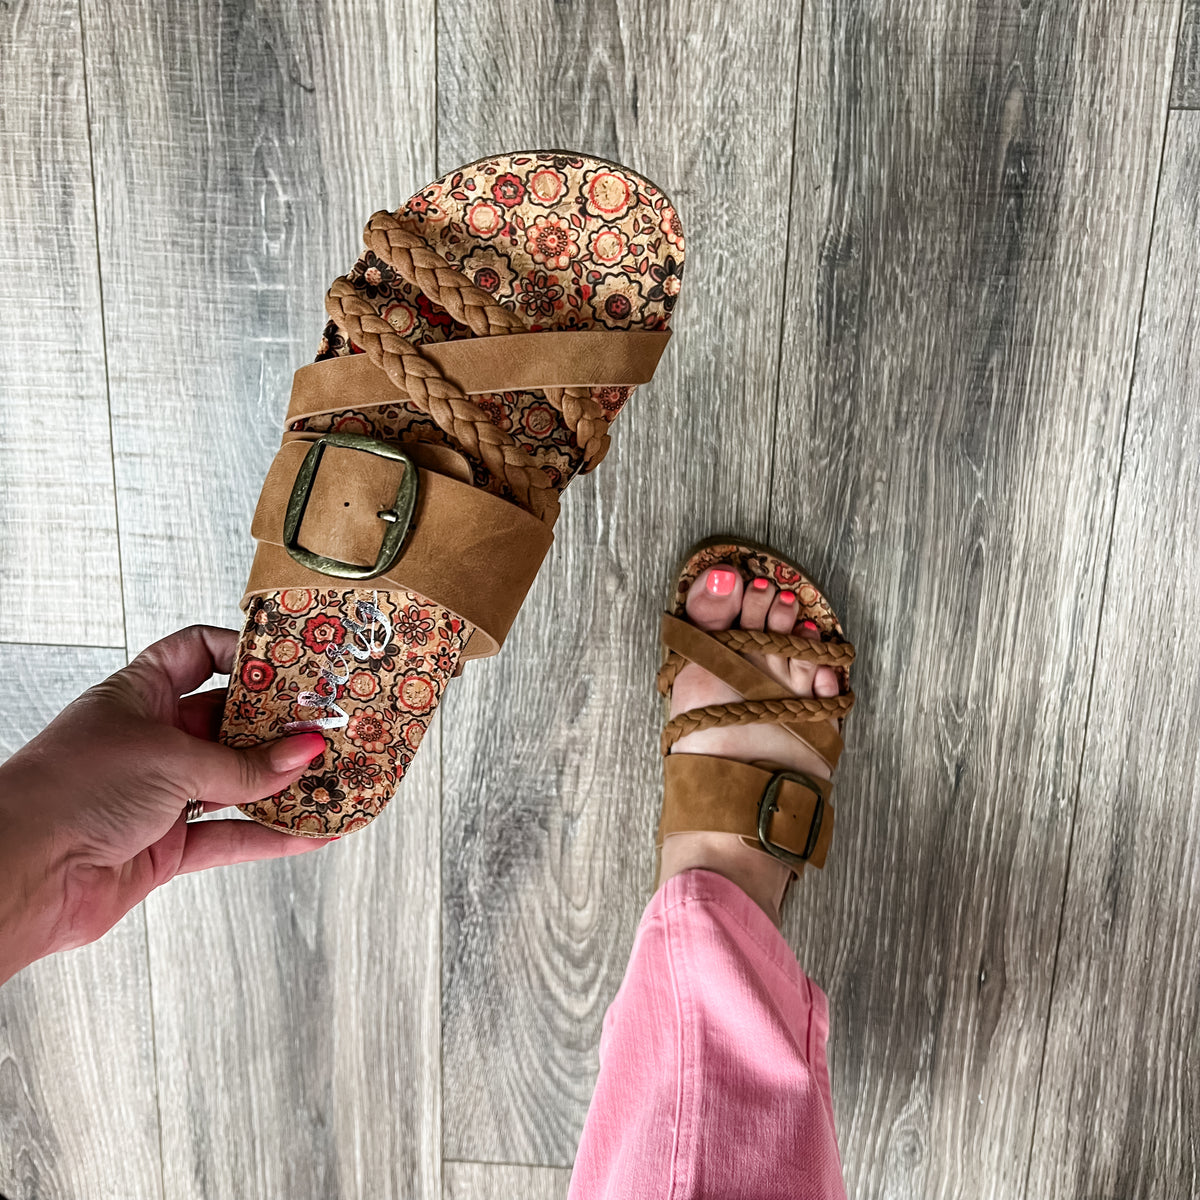 "Nora 2" Cork Bottom Sandal with Buckle and Braid Detail By Very G (Tan)